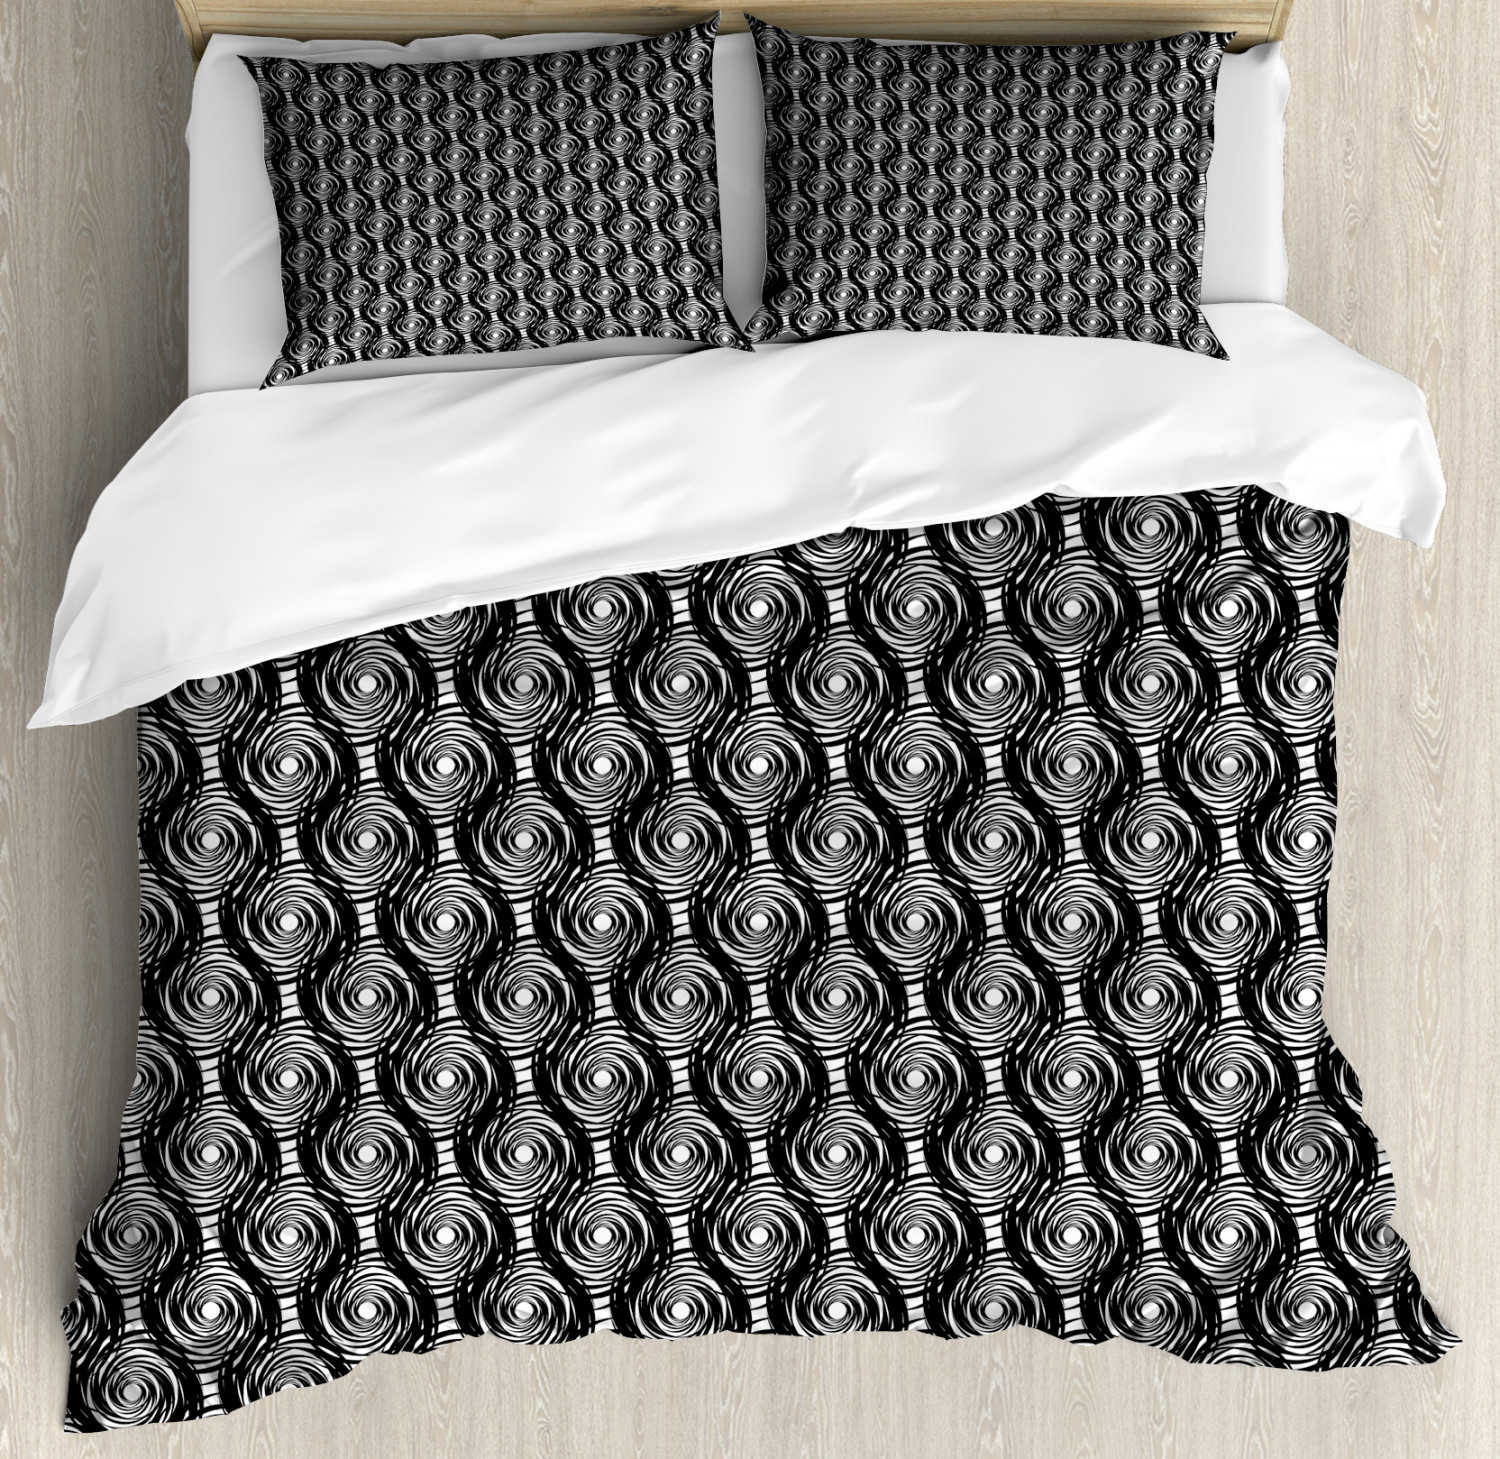 Details about   Starry Night Quilted Bedspread & Pillow Shams Set Round Spirals Print